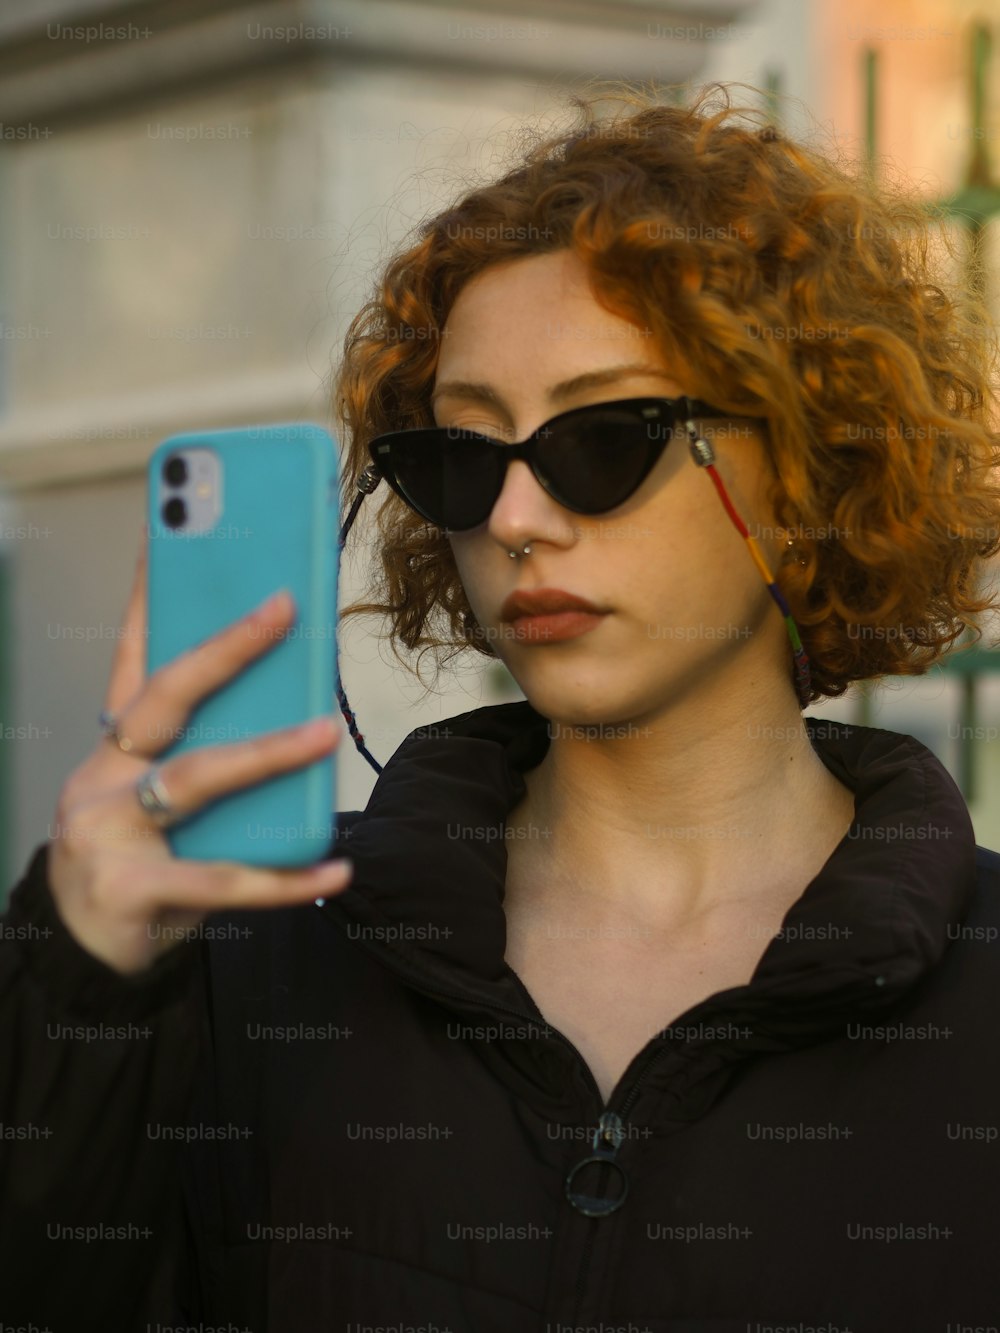 a woman with red hair and sunglasses holding a cell phone